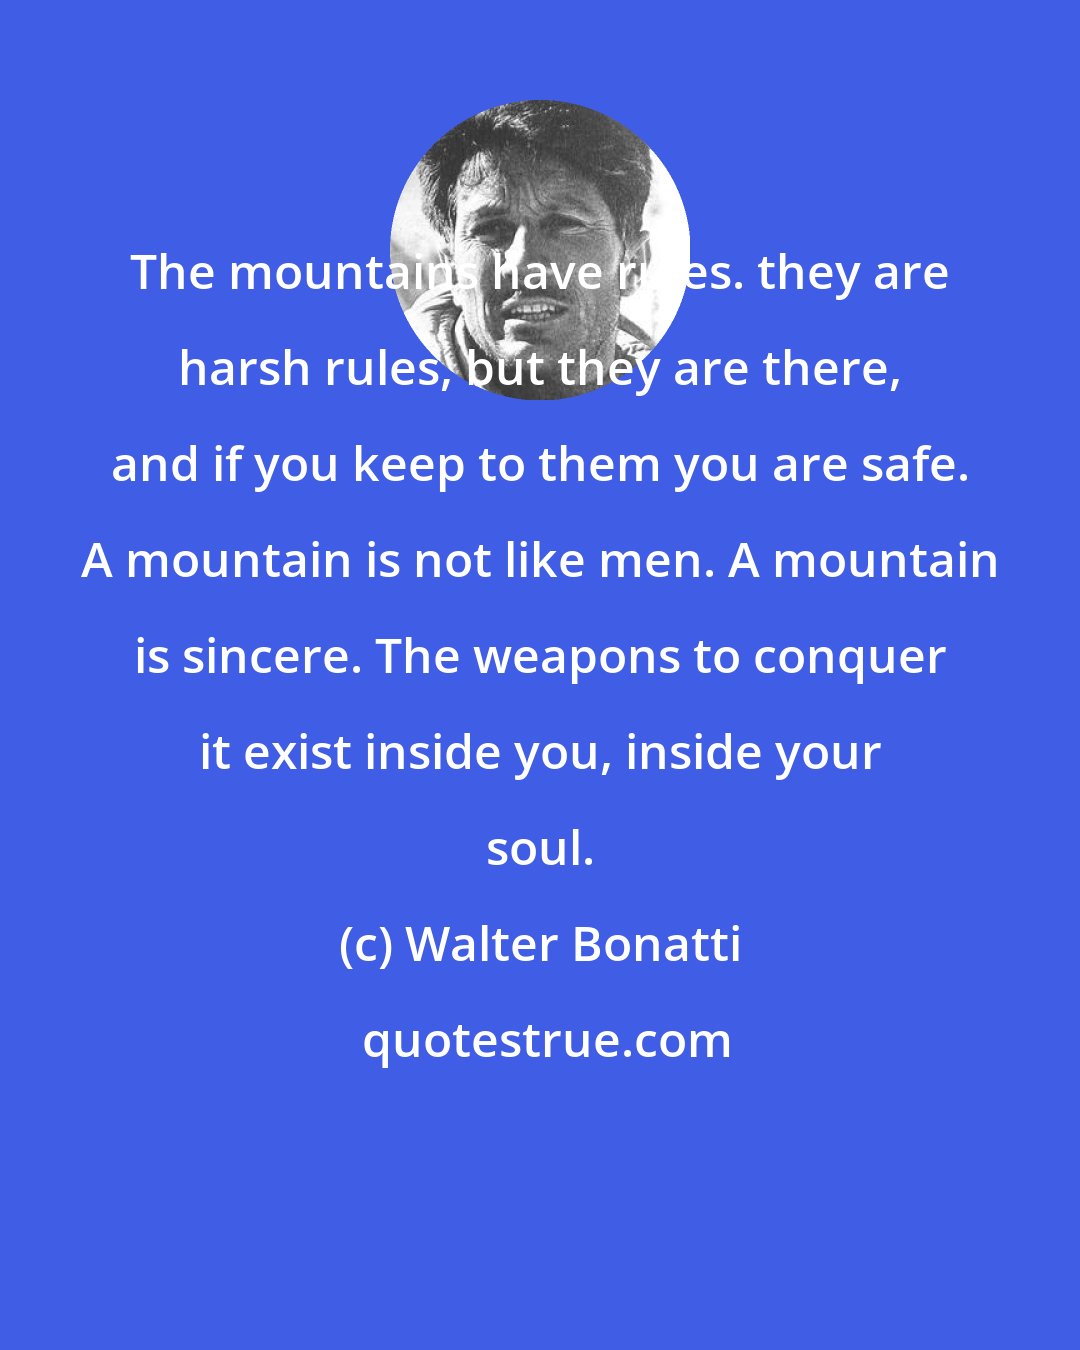 Walter Bonatti: The mountains have rules. they are harsh rules, but they are there, and if you keep to them you are safe. A mountain is not like men. A mountain is sincere. The weapons to conquer it exist inside you, inside your soul.